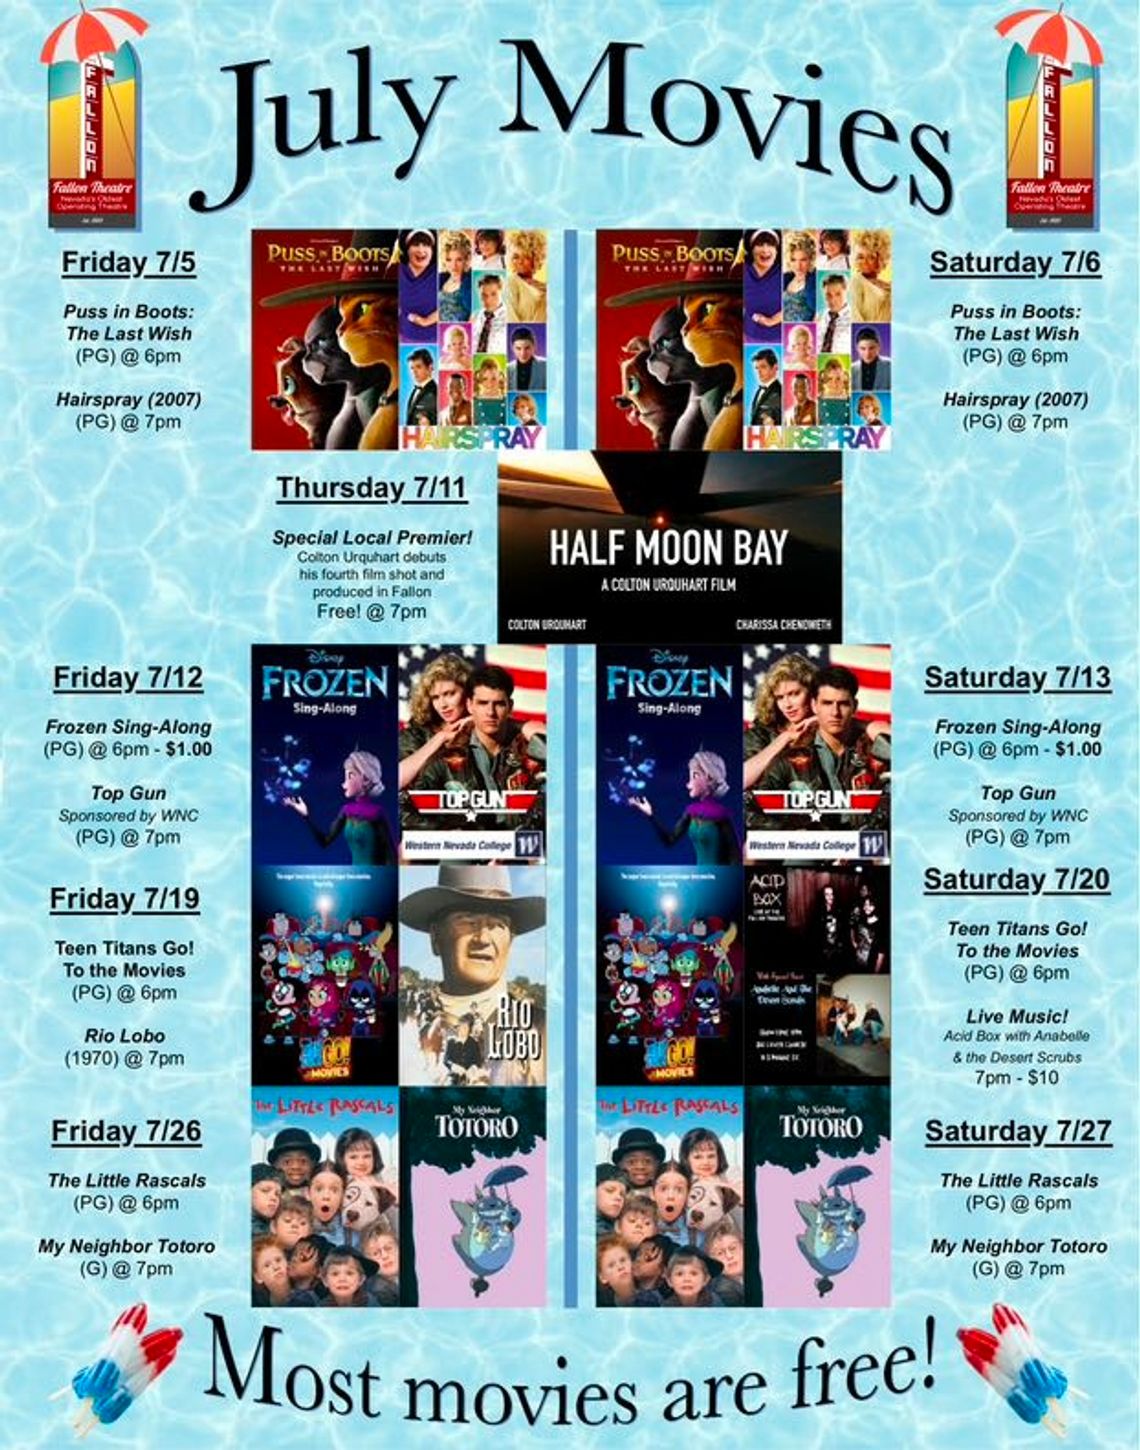 Movies & More - July 5 and 6, “Puss in Boots: The Last Wish" and "Hairspray”